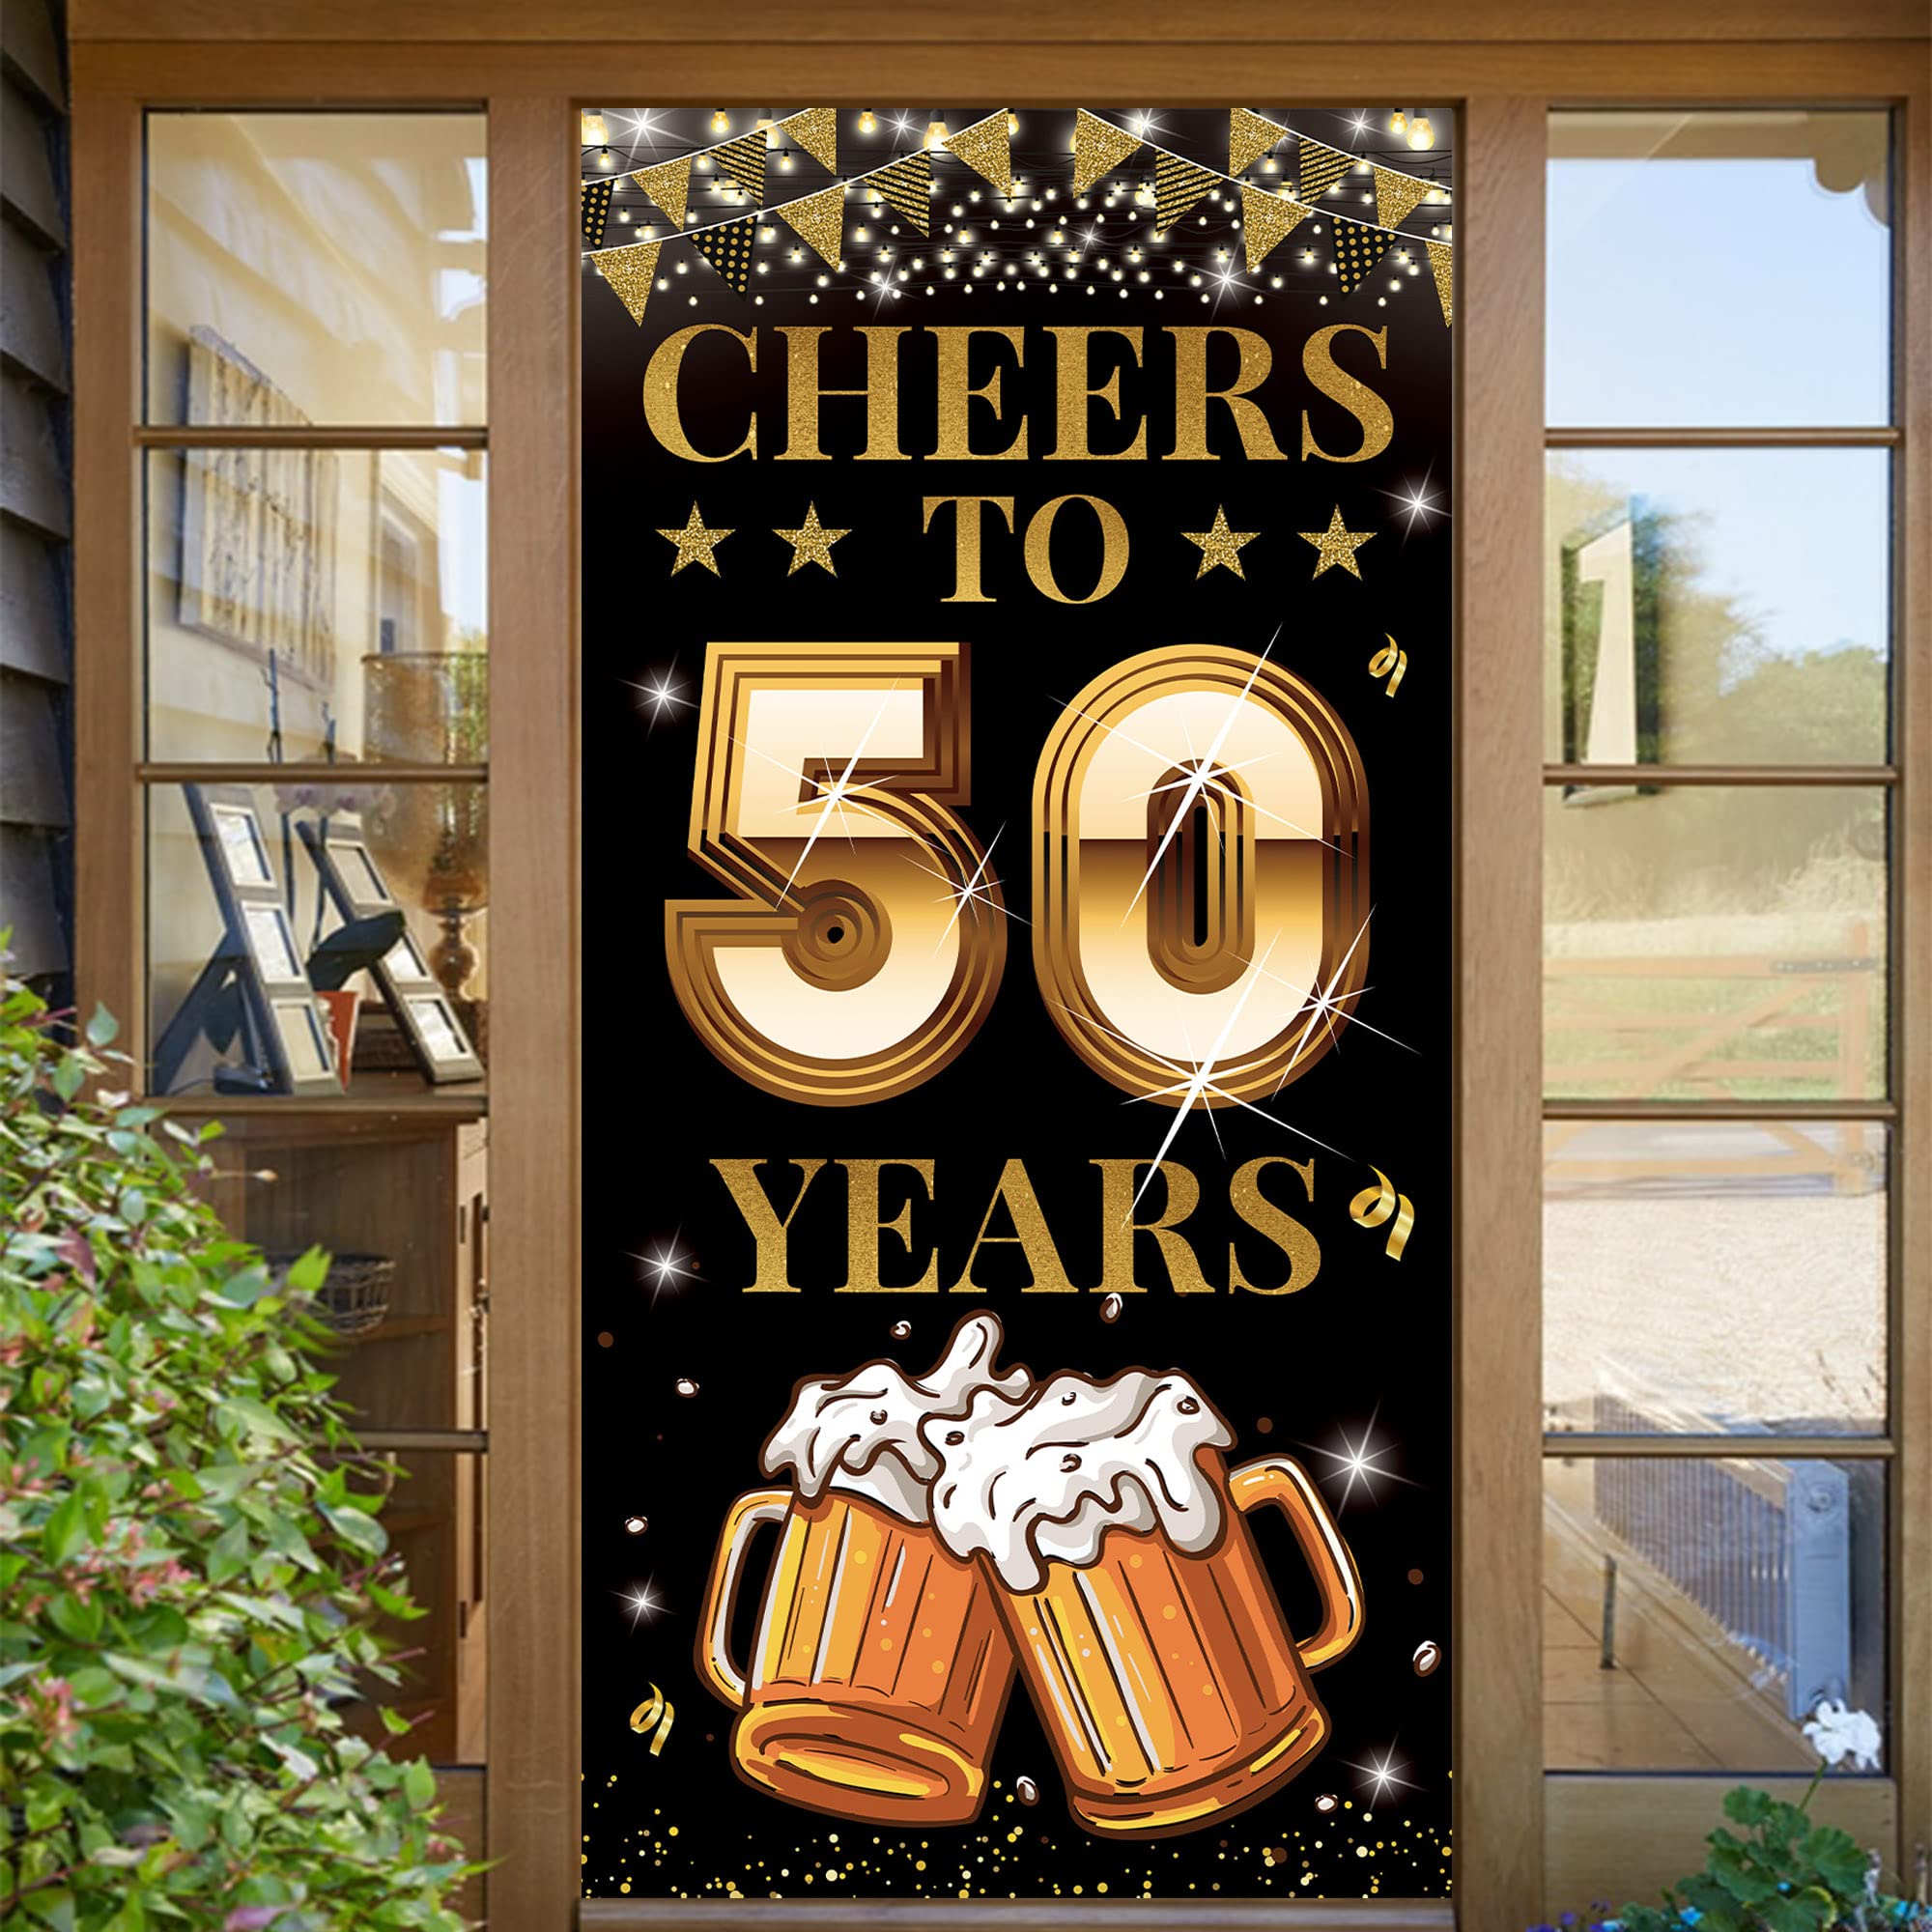 Cheers to 50 Years Door Banner, Happy 50th Birthday Decorations for Men Women, Golden 50th Anniversary, Black Gold 50 Year Class Reunion Party Backdrop Yard Sign for Outdoor Indoor, Fabric, Vicycaty